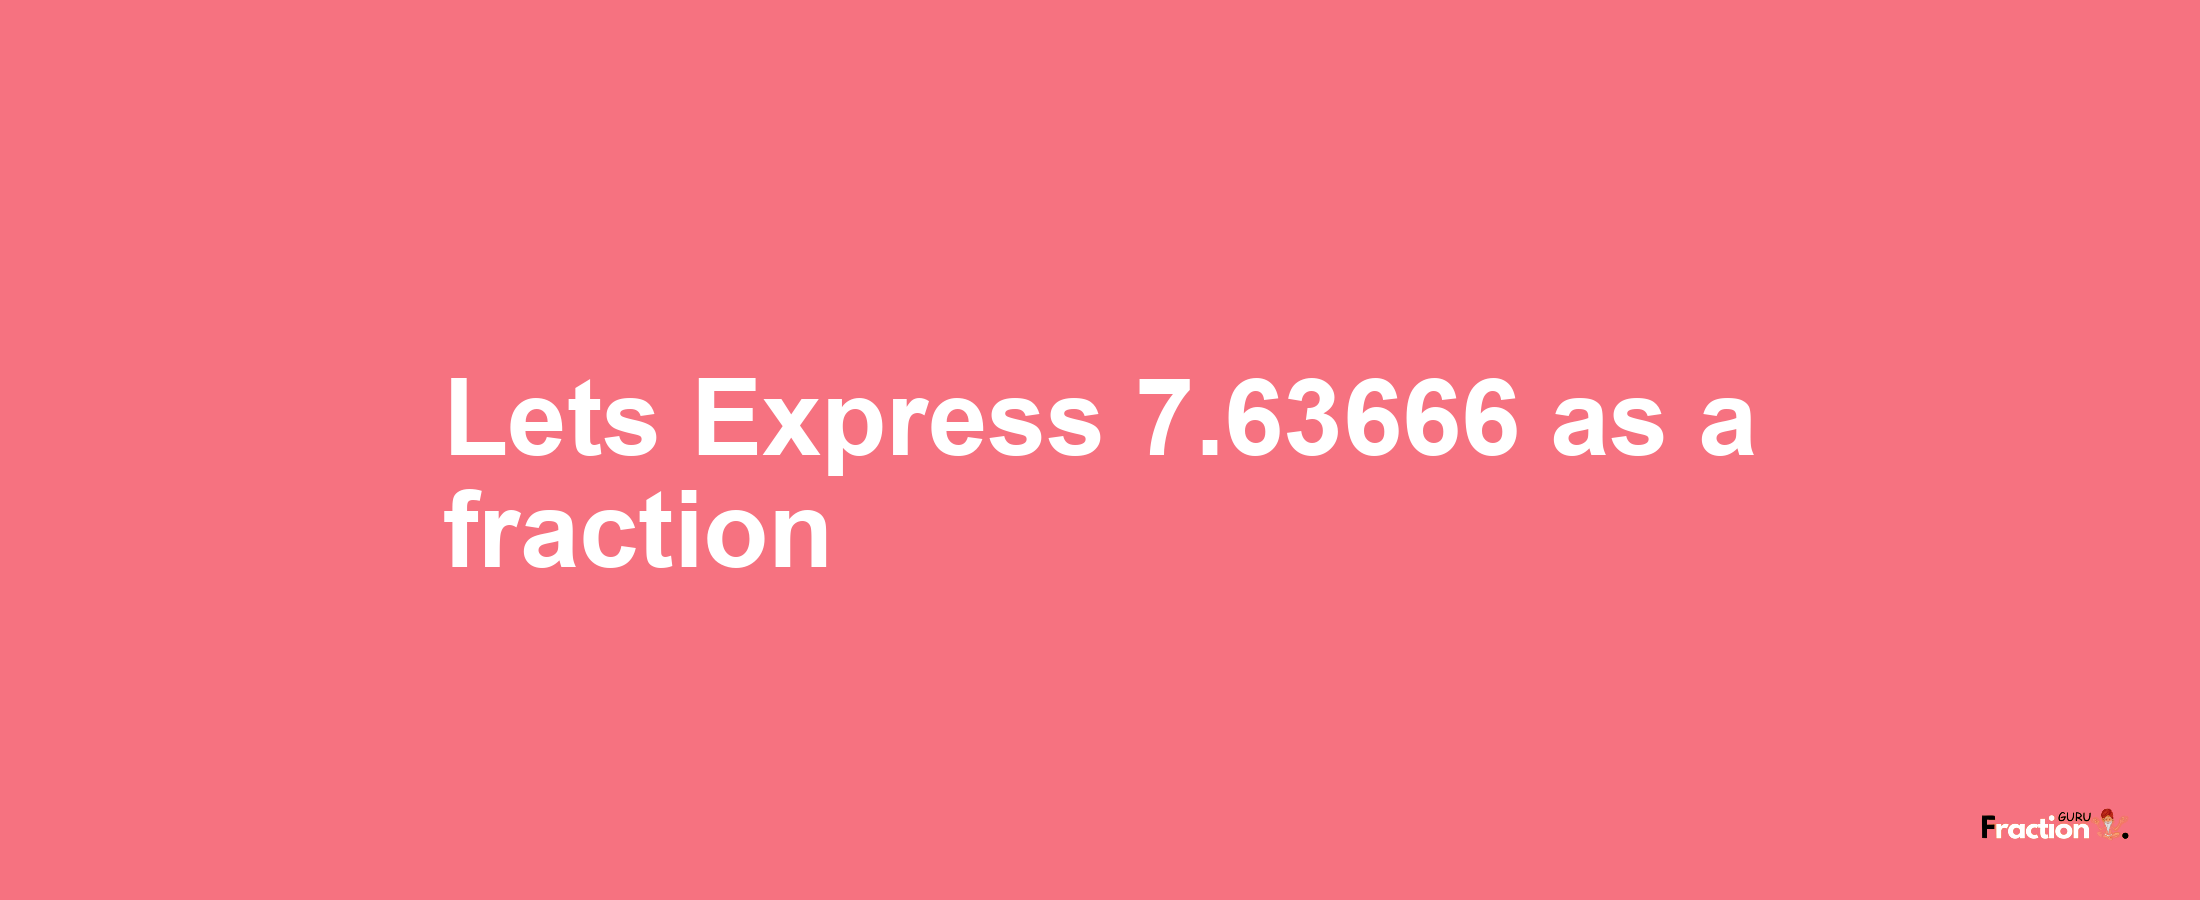 Lets Express 7.63666 as afraction